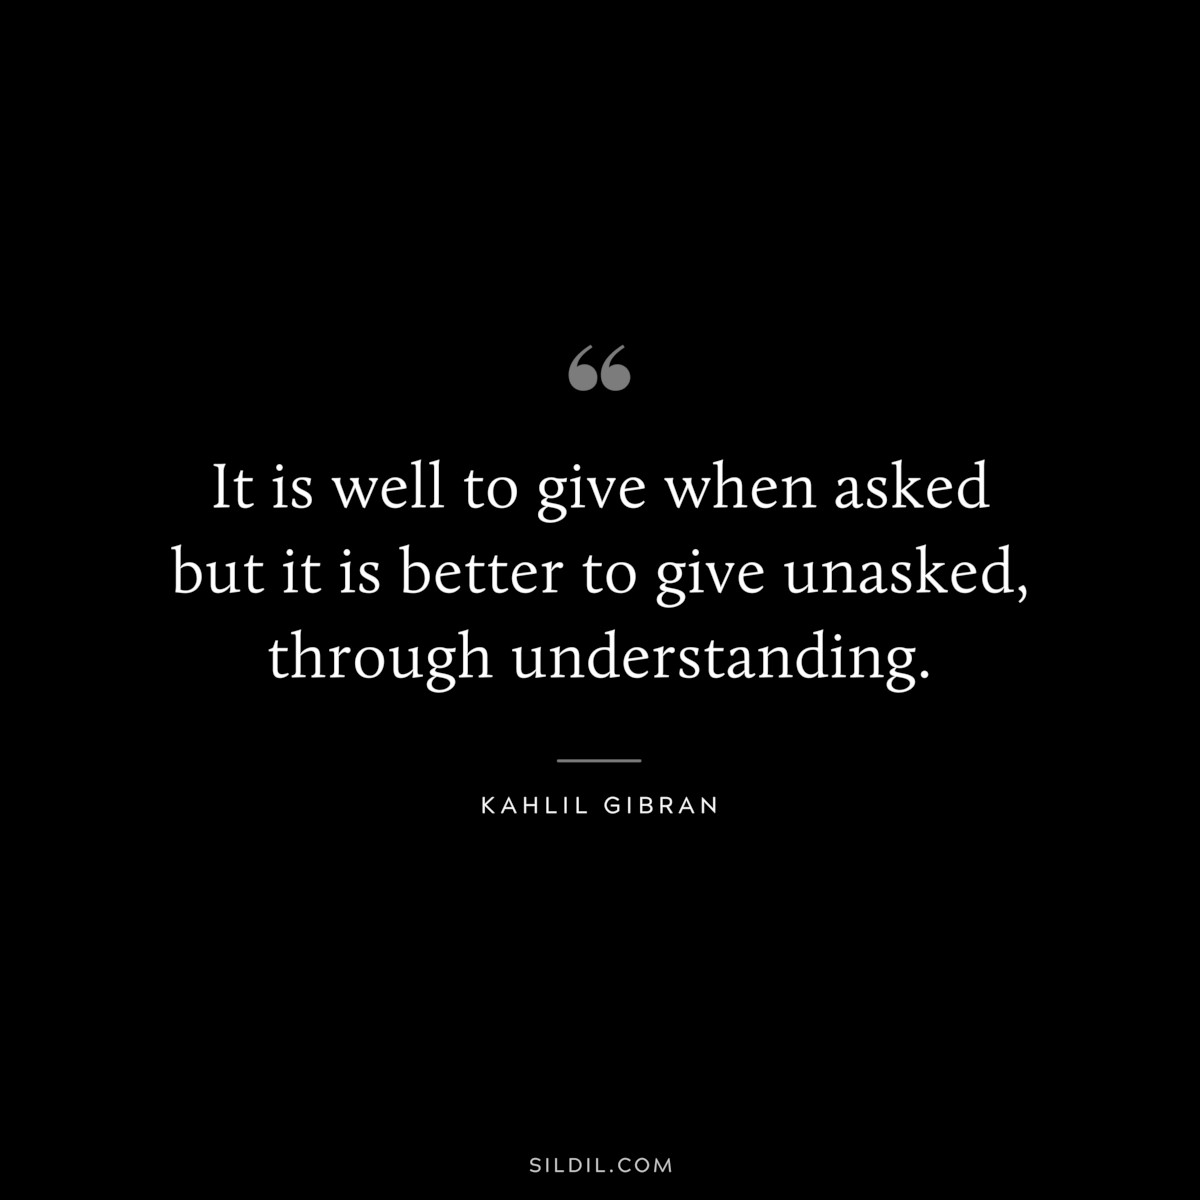 It is well to give when asked but it is better to give unasked, through understanding. ― Kahlil Gibran